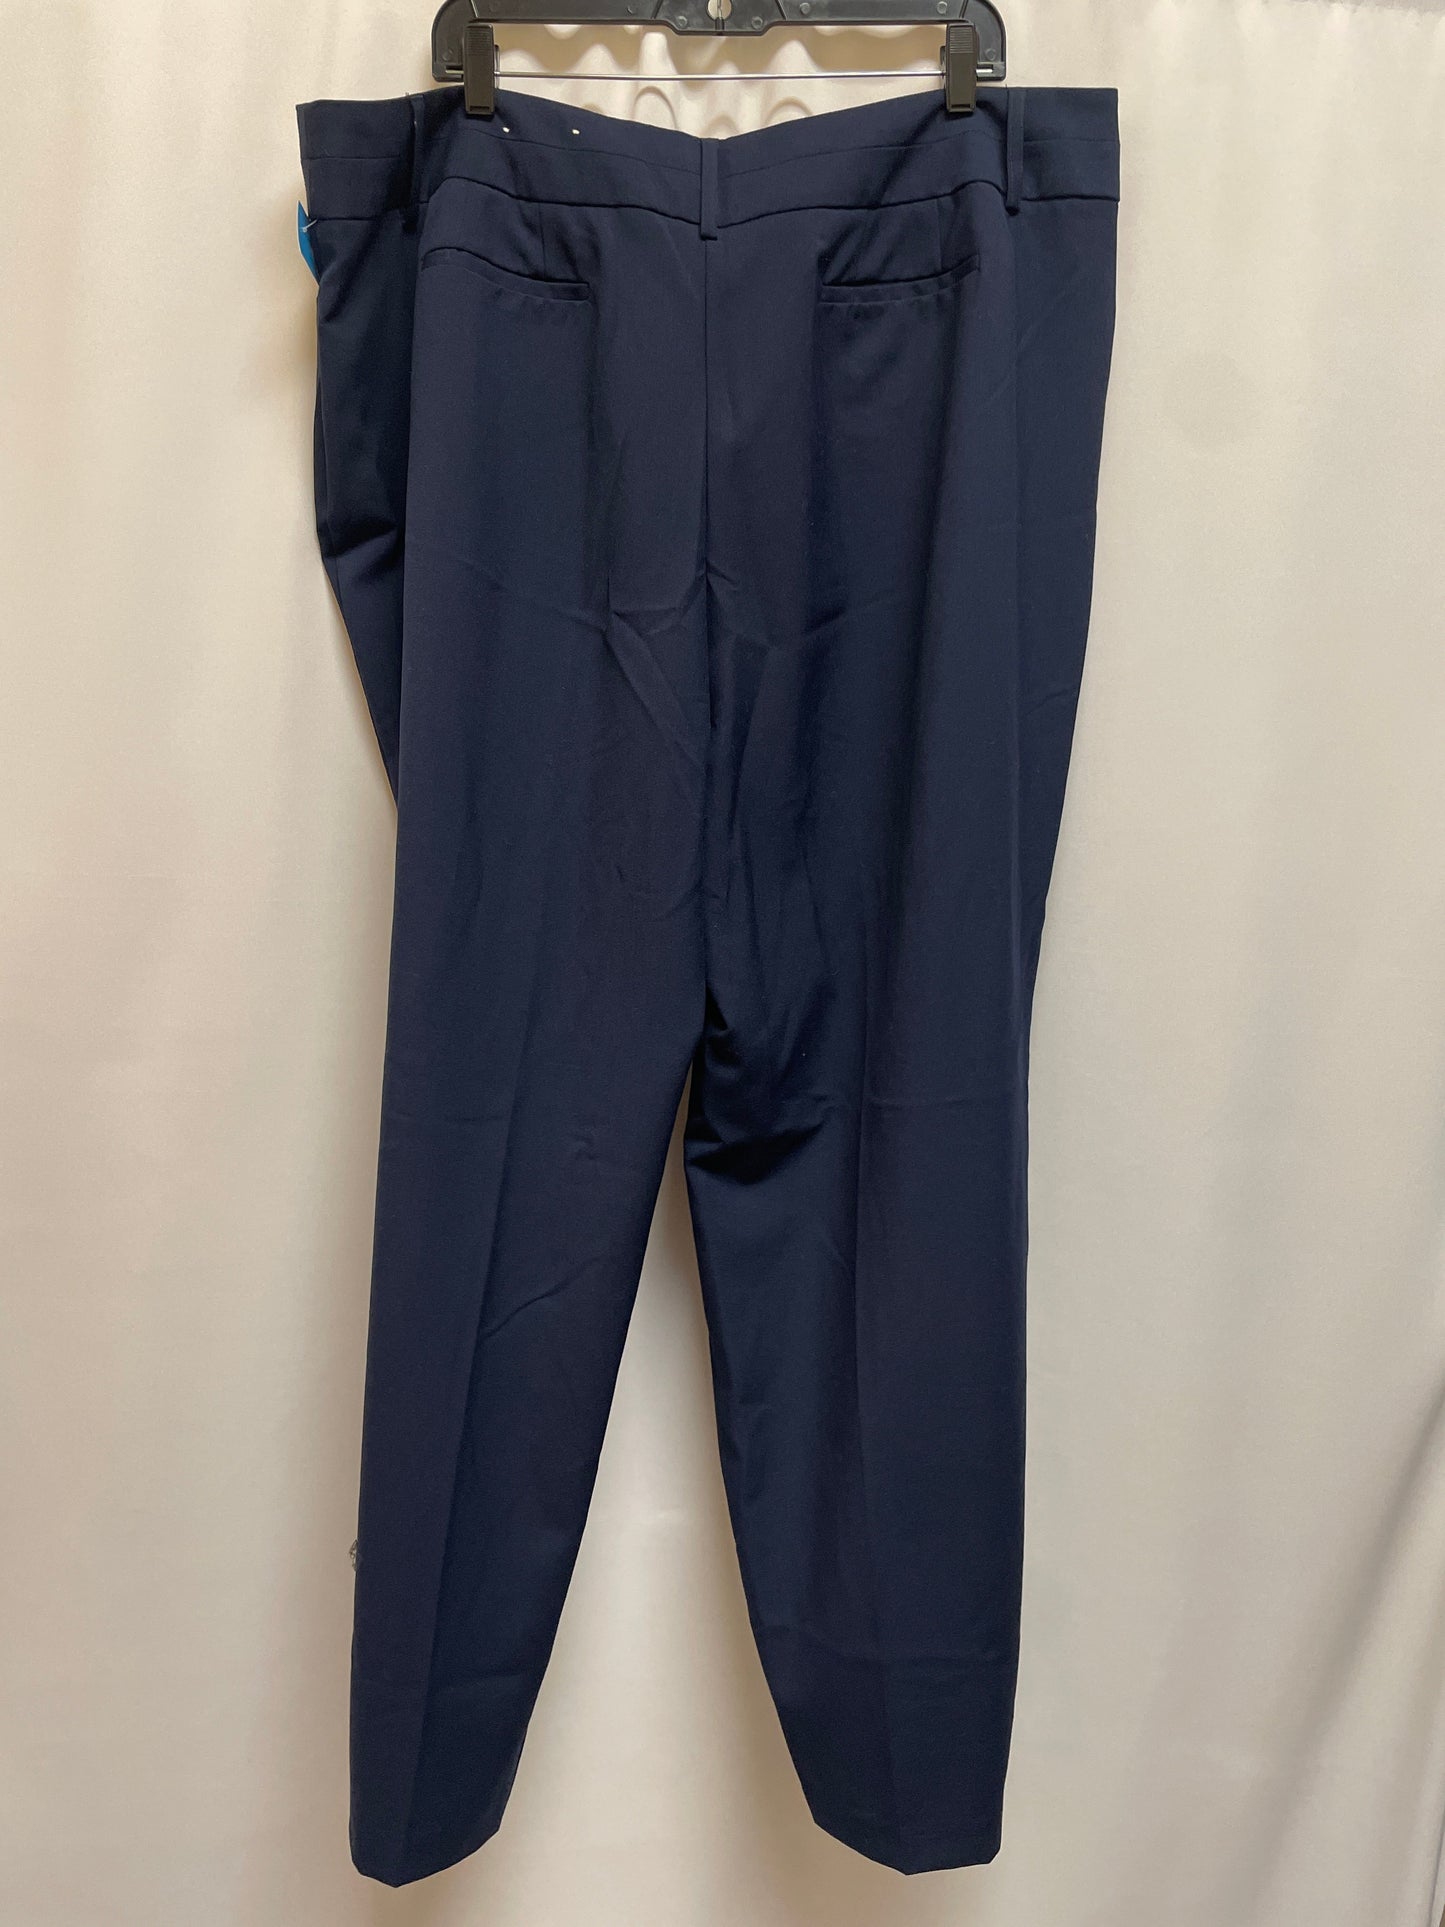 Pants Ankle By Cato  Size: 20